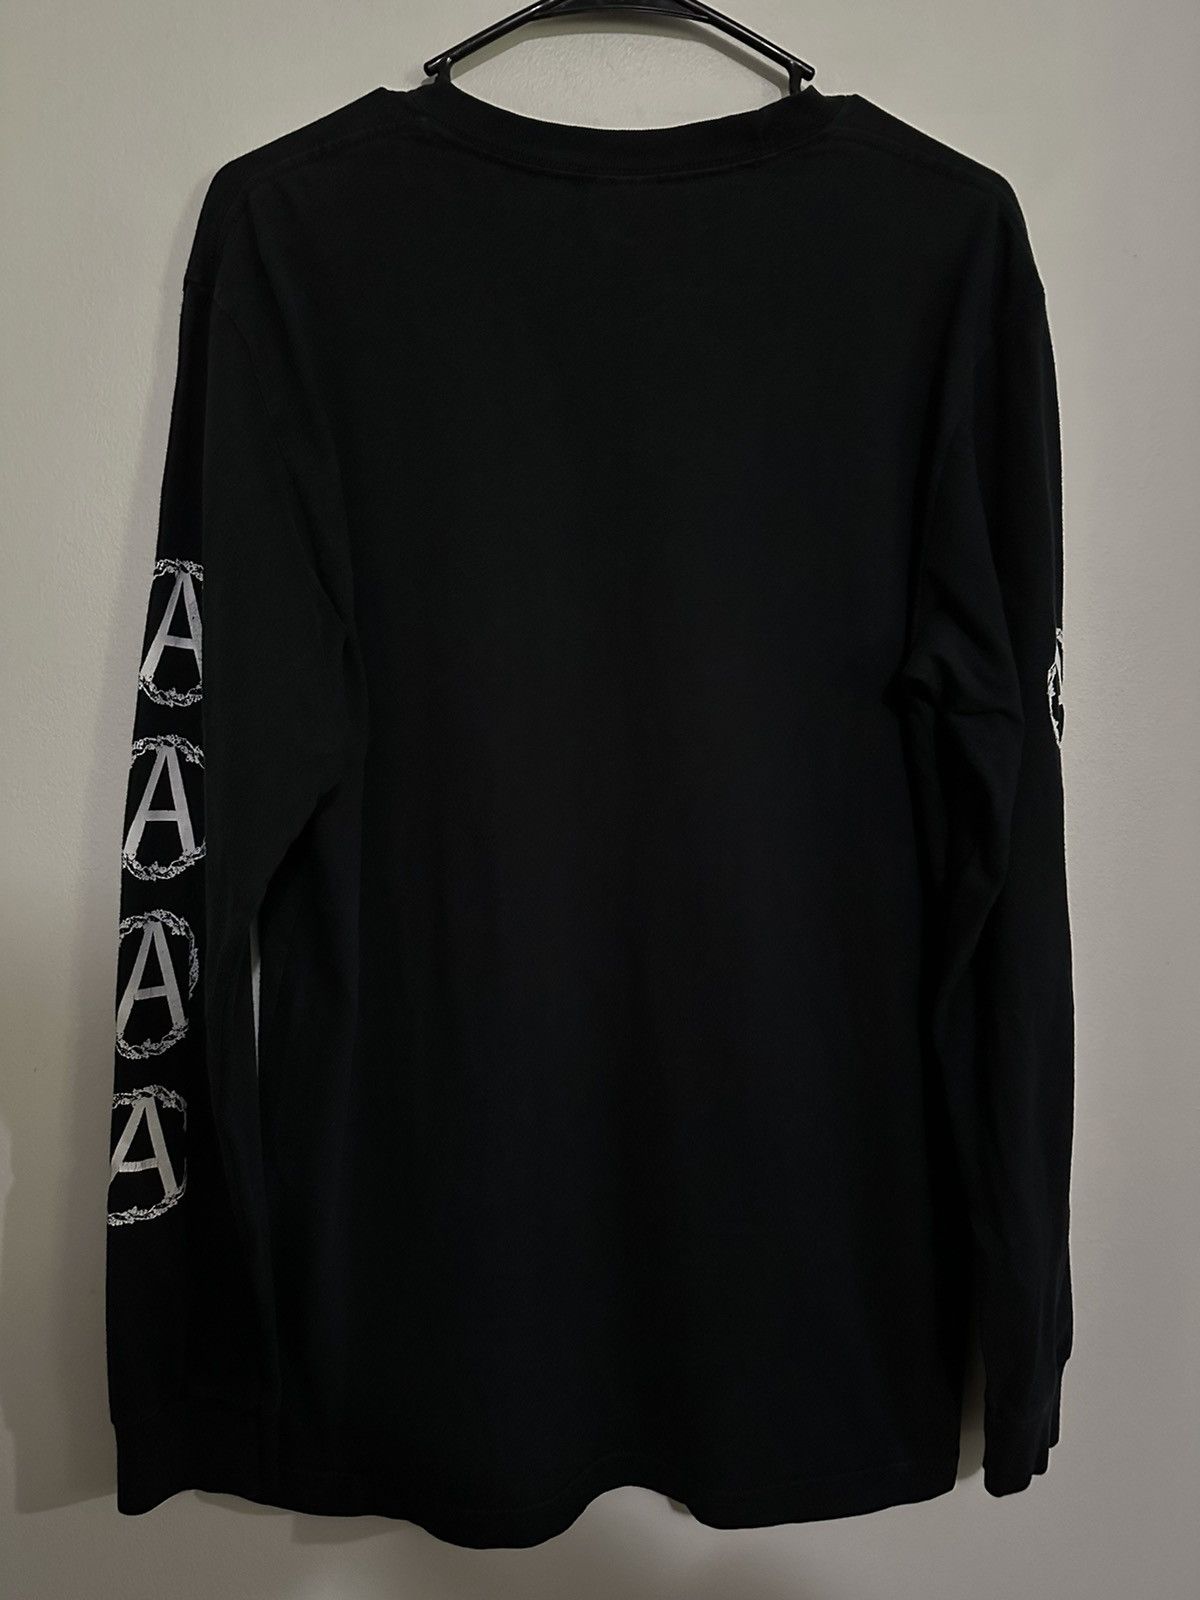 Supreme Supreme Undercover Anarchy Long Sleeve Tee | Grailed